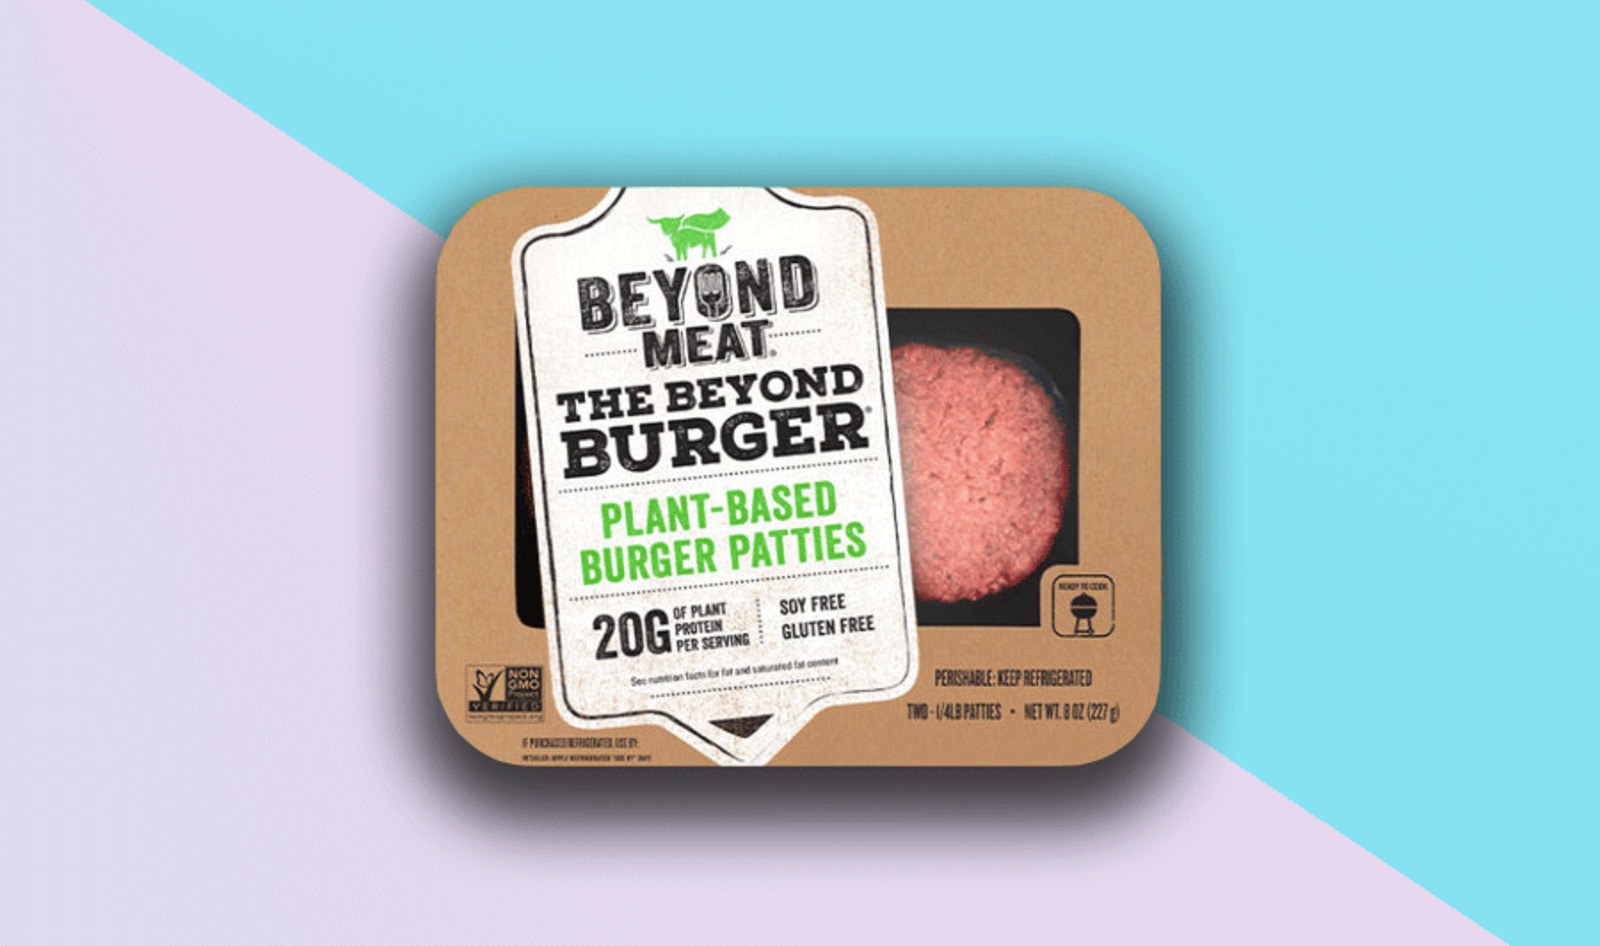 German Supermarket Lidl Sells Out of Beyond Burgers in Less Than 24 Hours